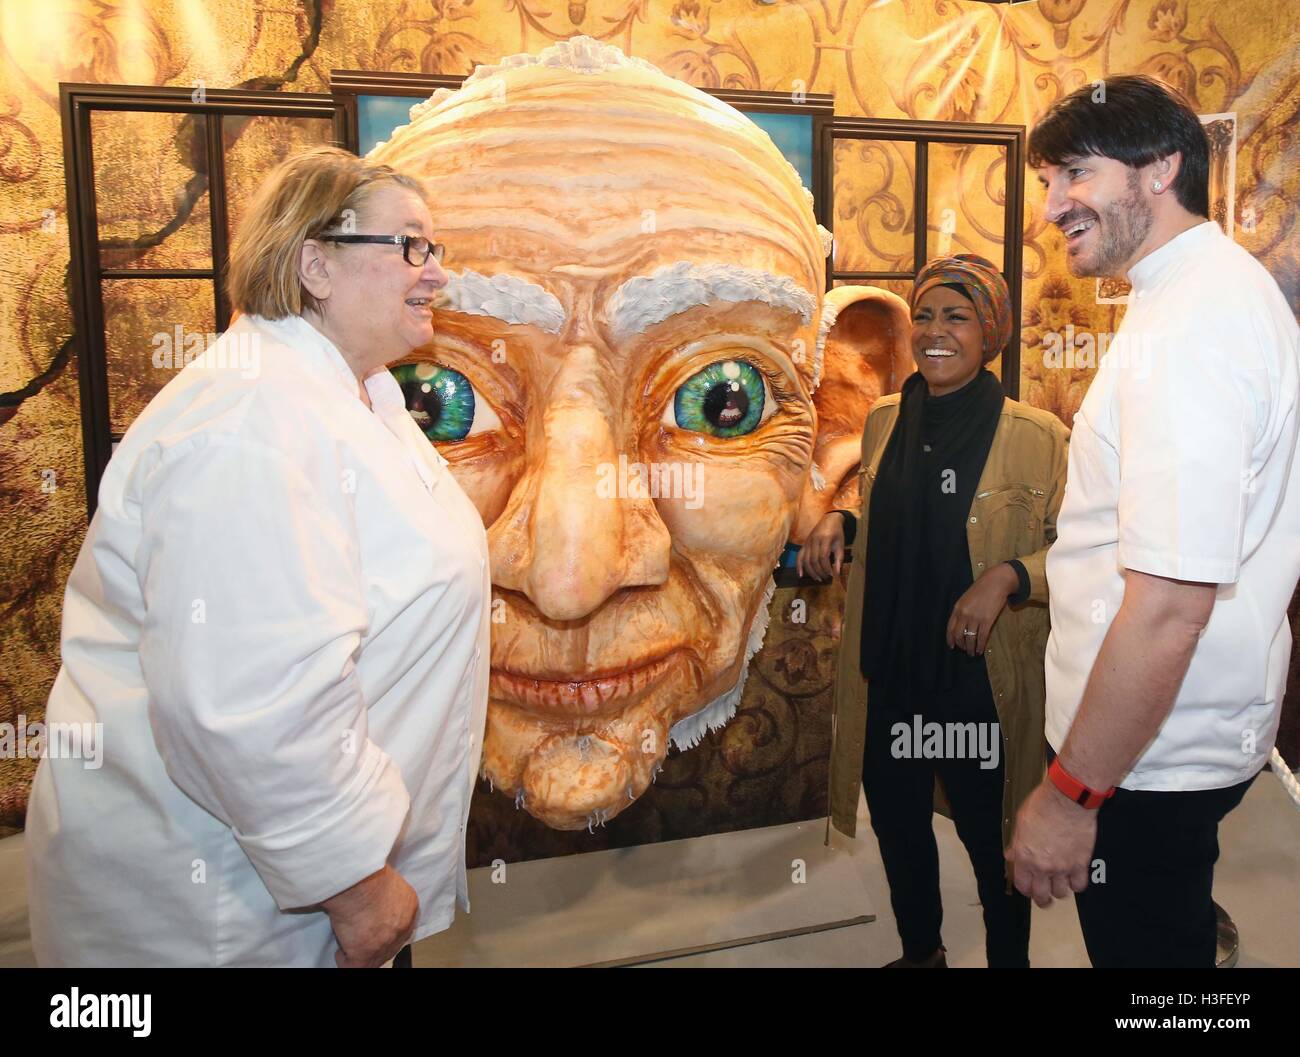 (Left to right) TV chef Rosemary Shrager, Great British Bake Off winner and master patissier Eric Lanlard look at a sugar sculpture at the Cake and Bake Show at ExCeL in London. Stock Photo